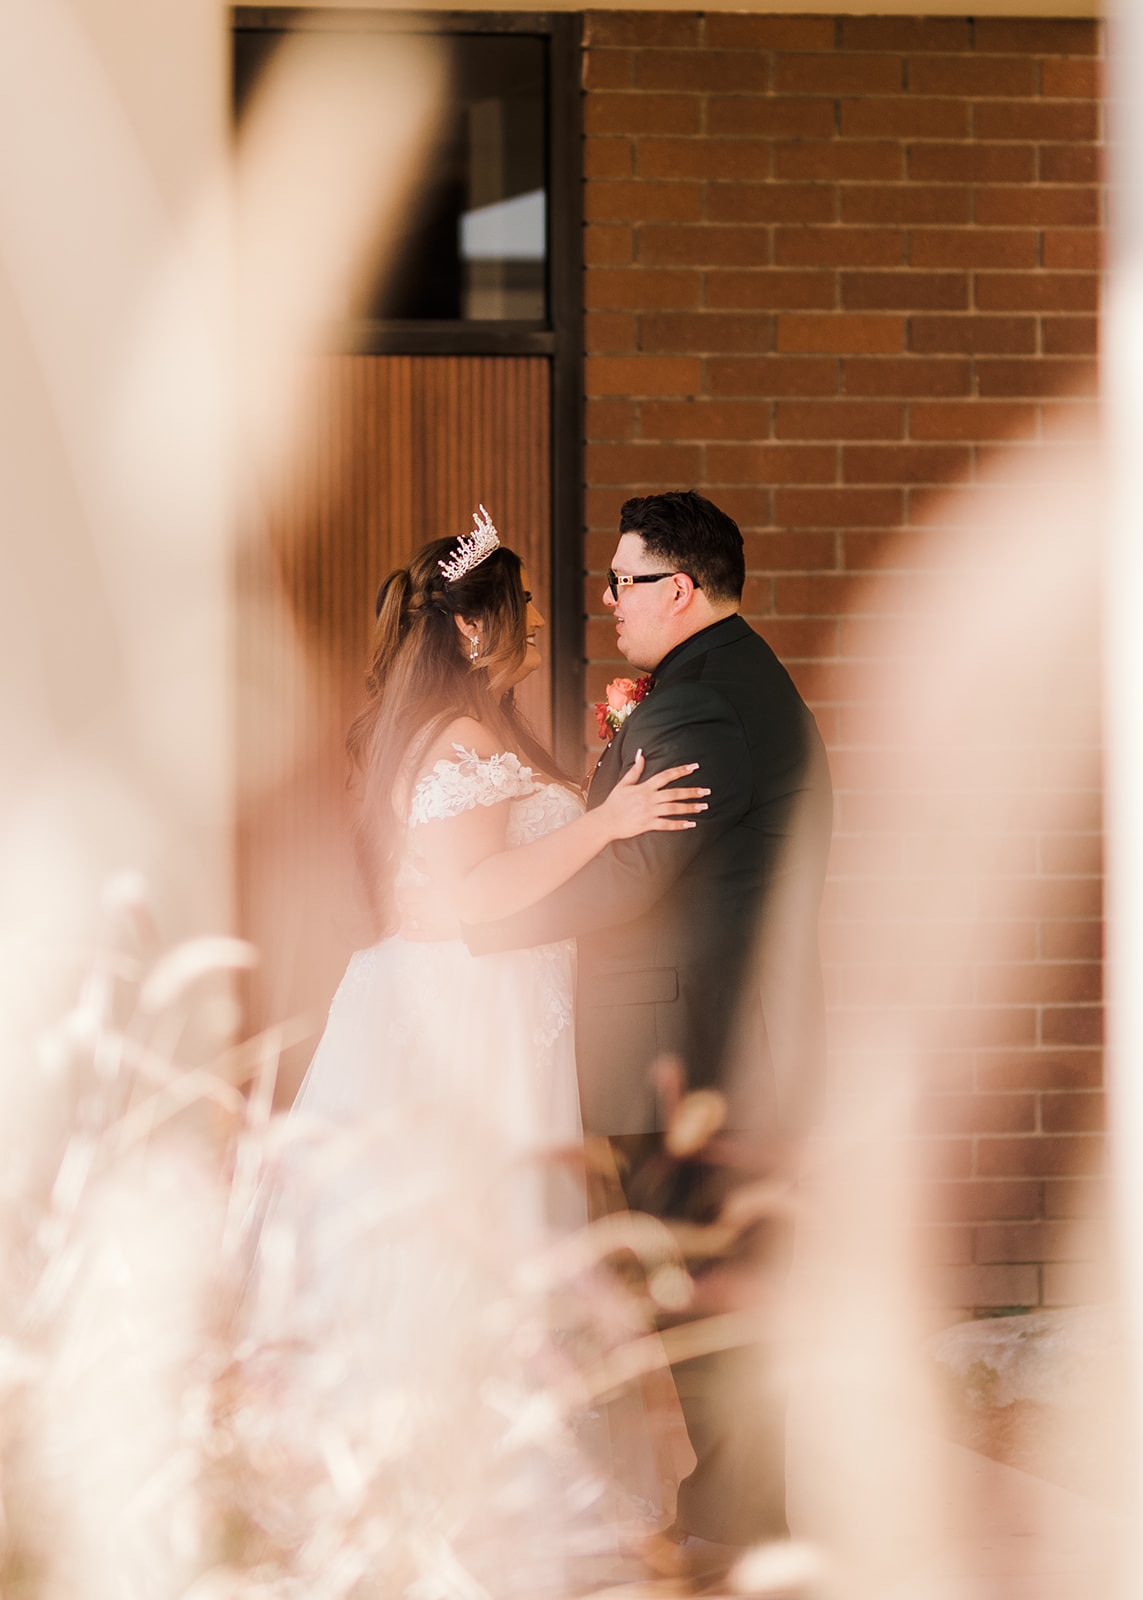 a small personal moment after being married at Saint Angela Merici Catholic Church